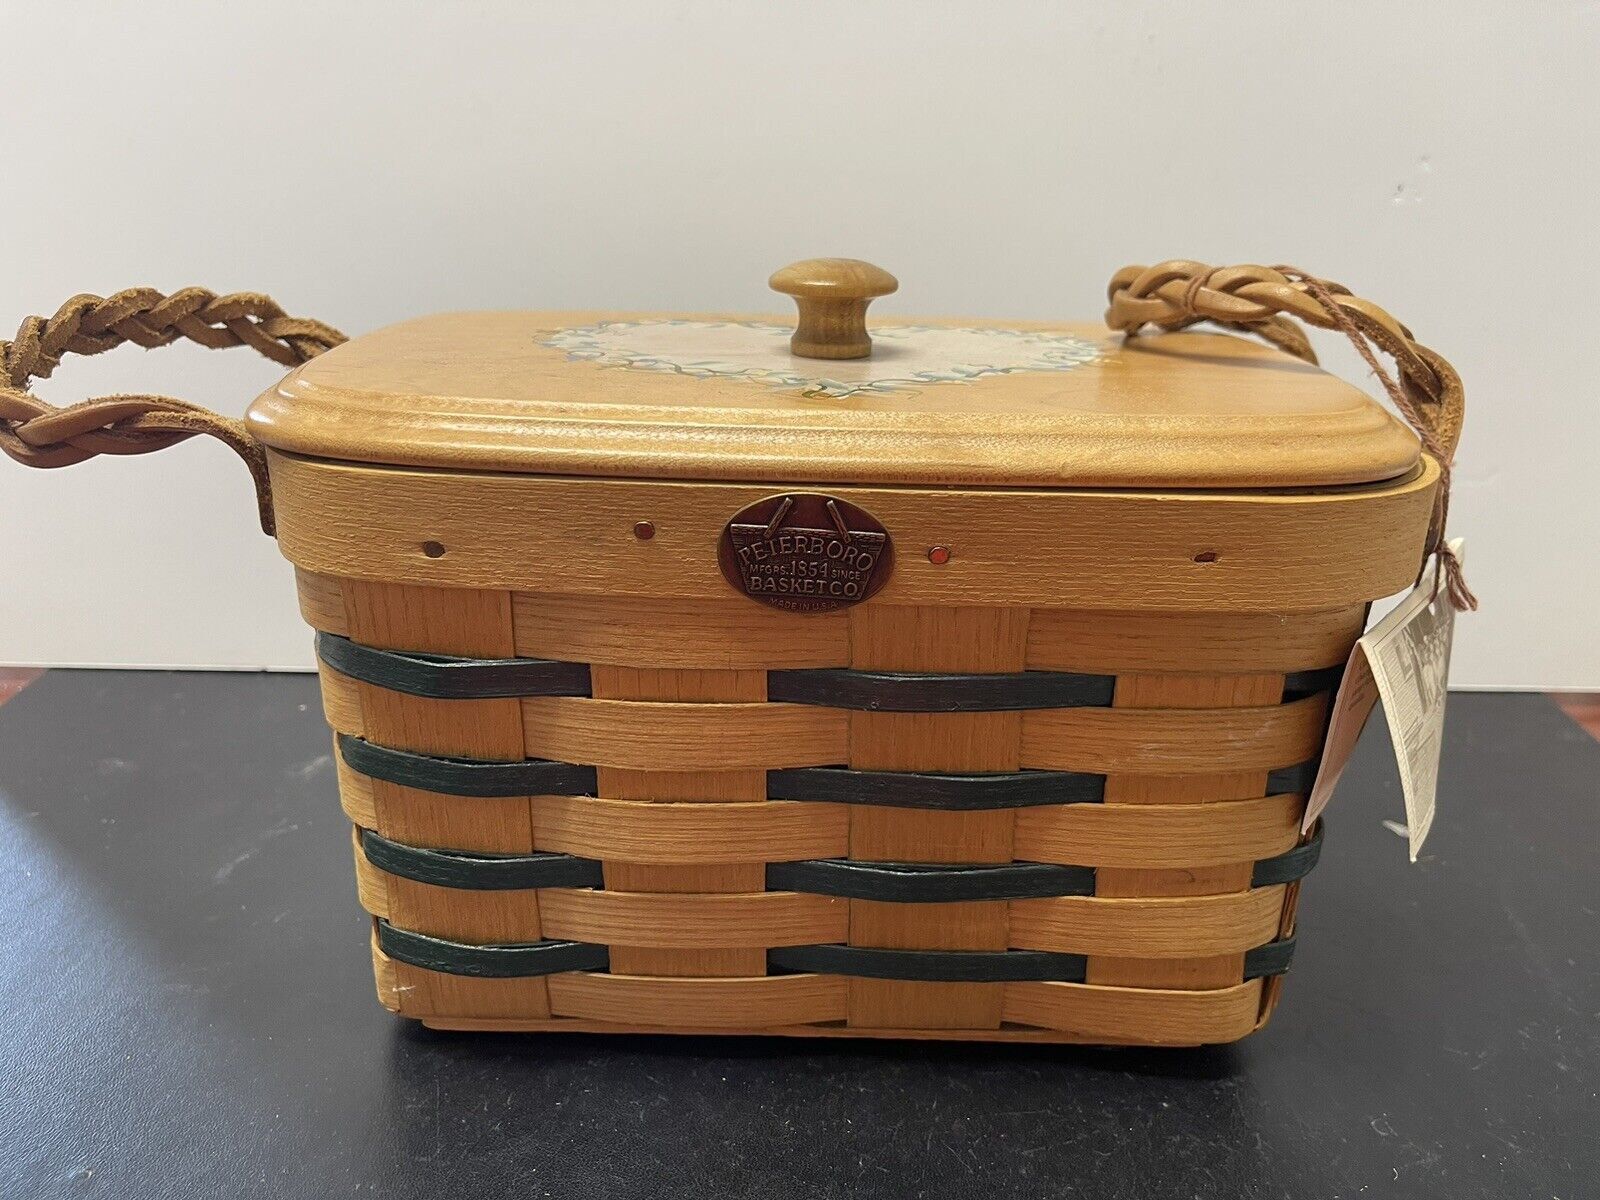 Peterboro Picnic Basket with Wood Lid with Heart Design